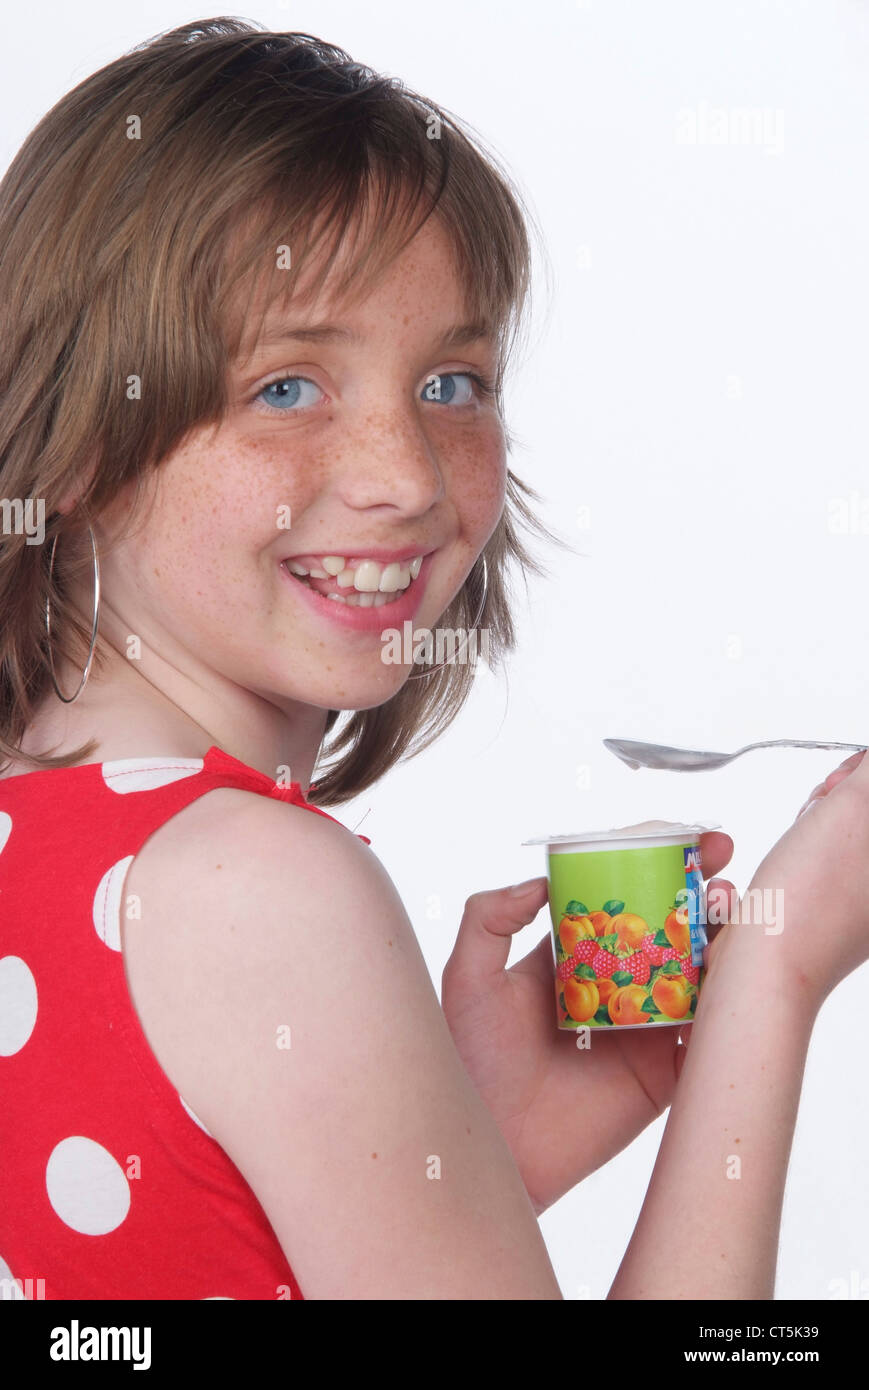 ADOLESCENT, DAIRY PRODUCT Stock Photo